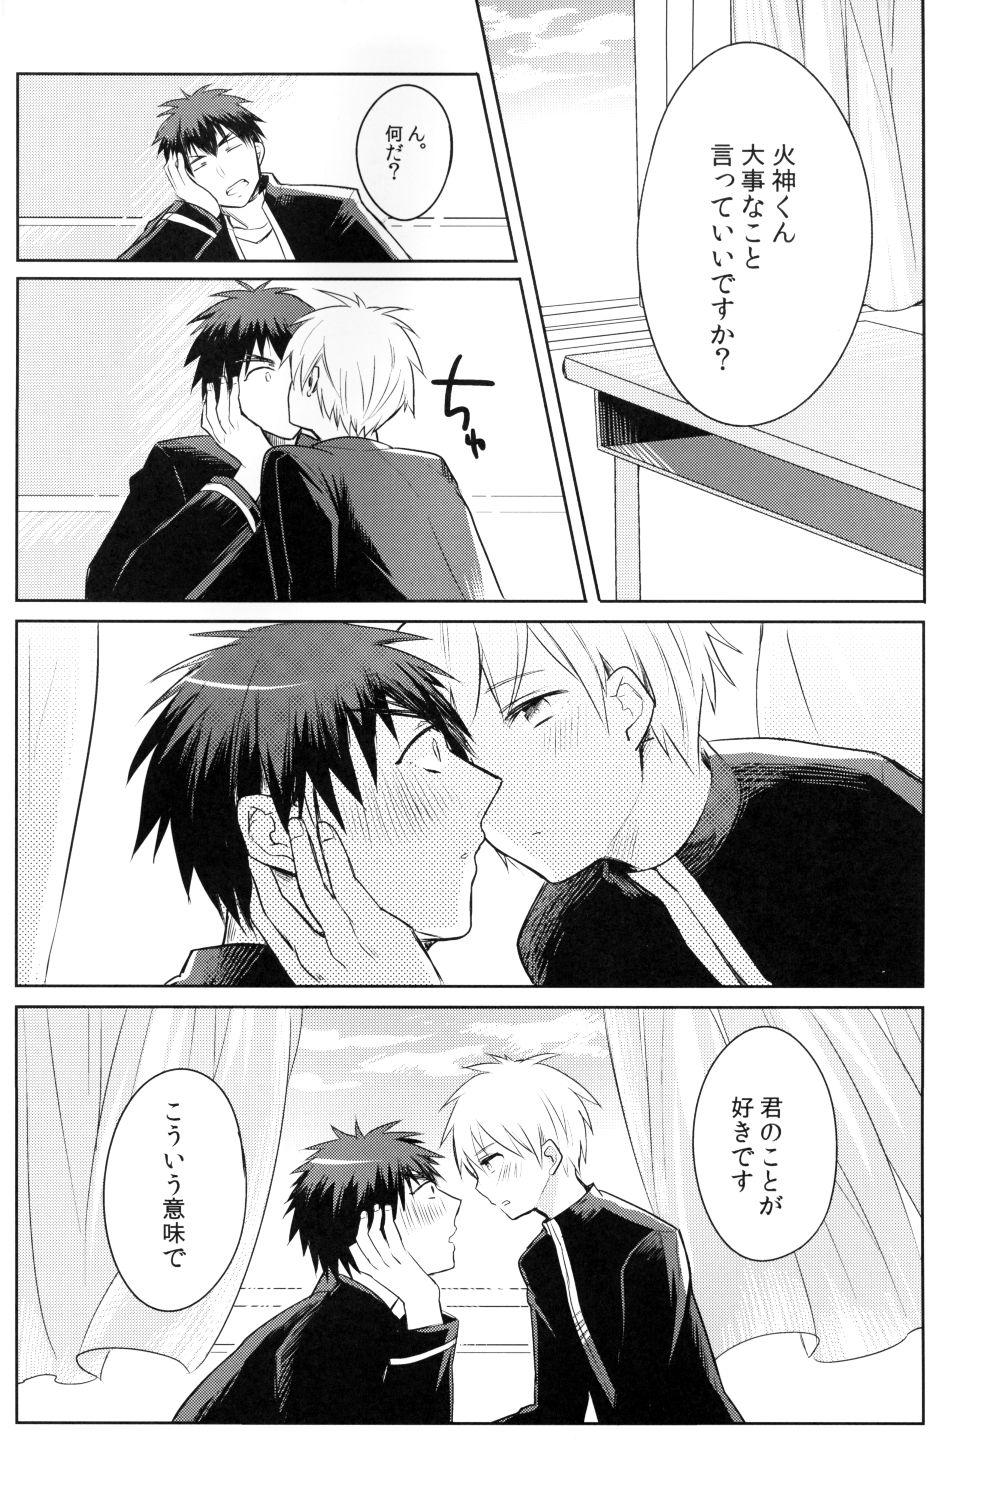 Kagami-kun's Thing is Amazing!! 4